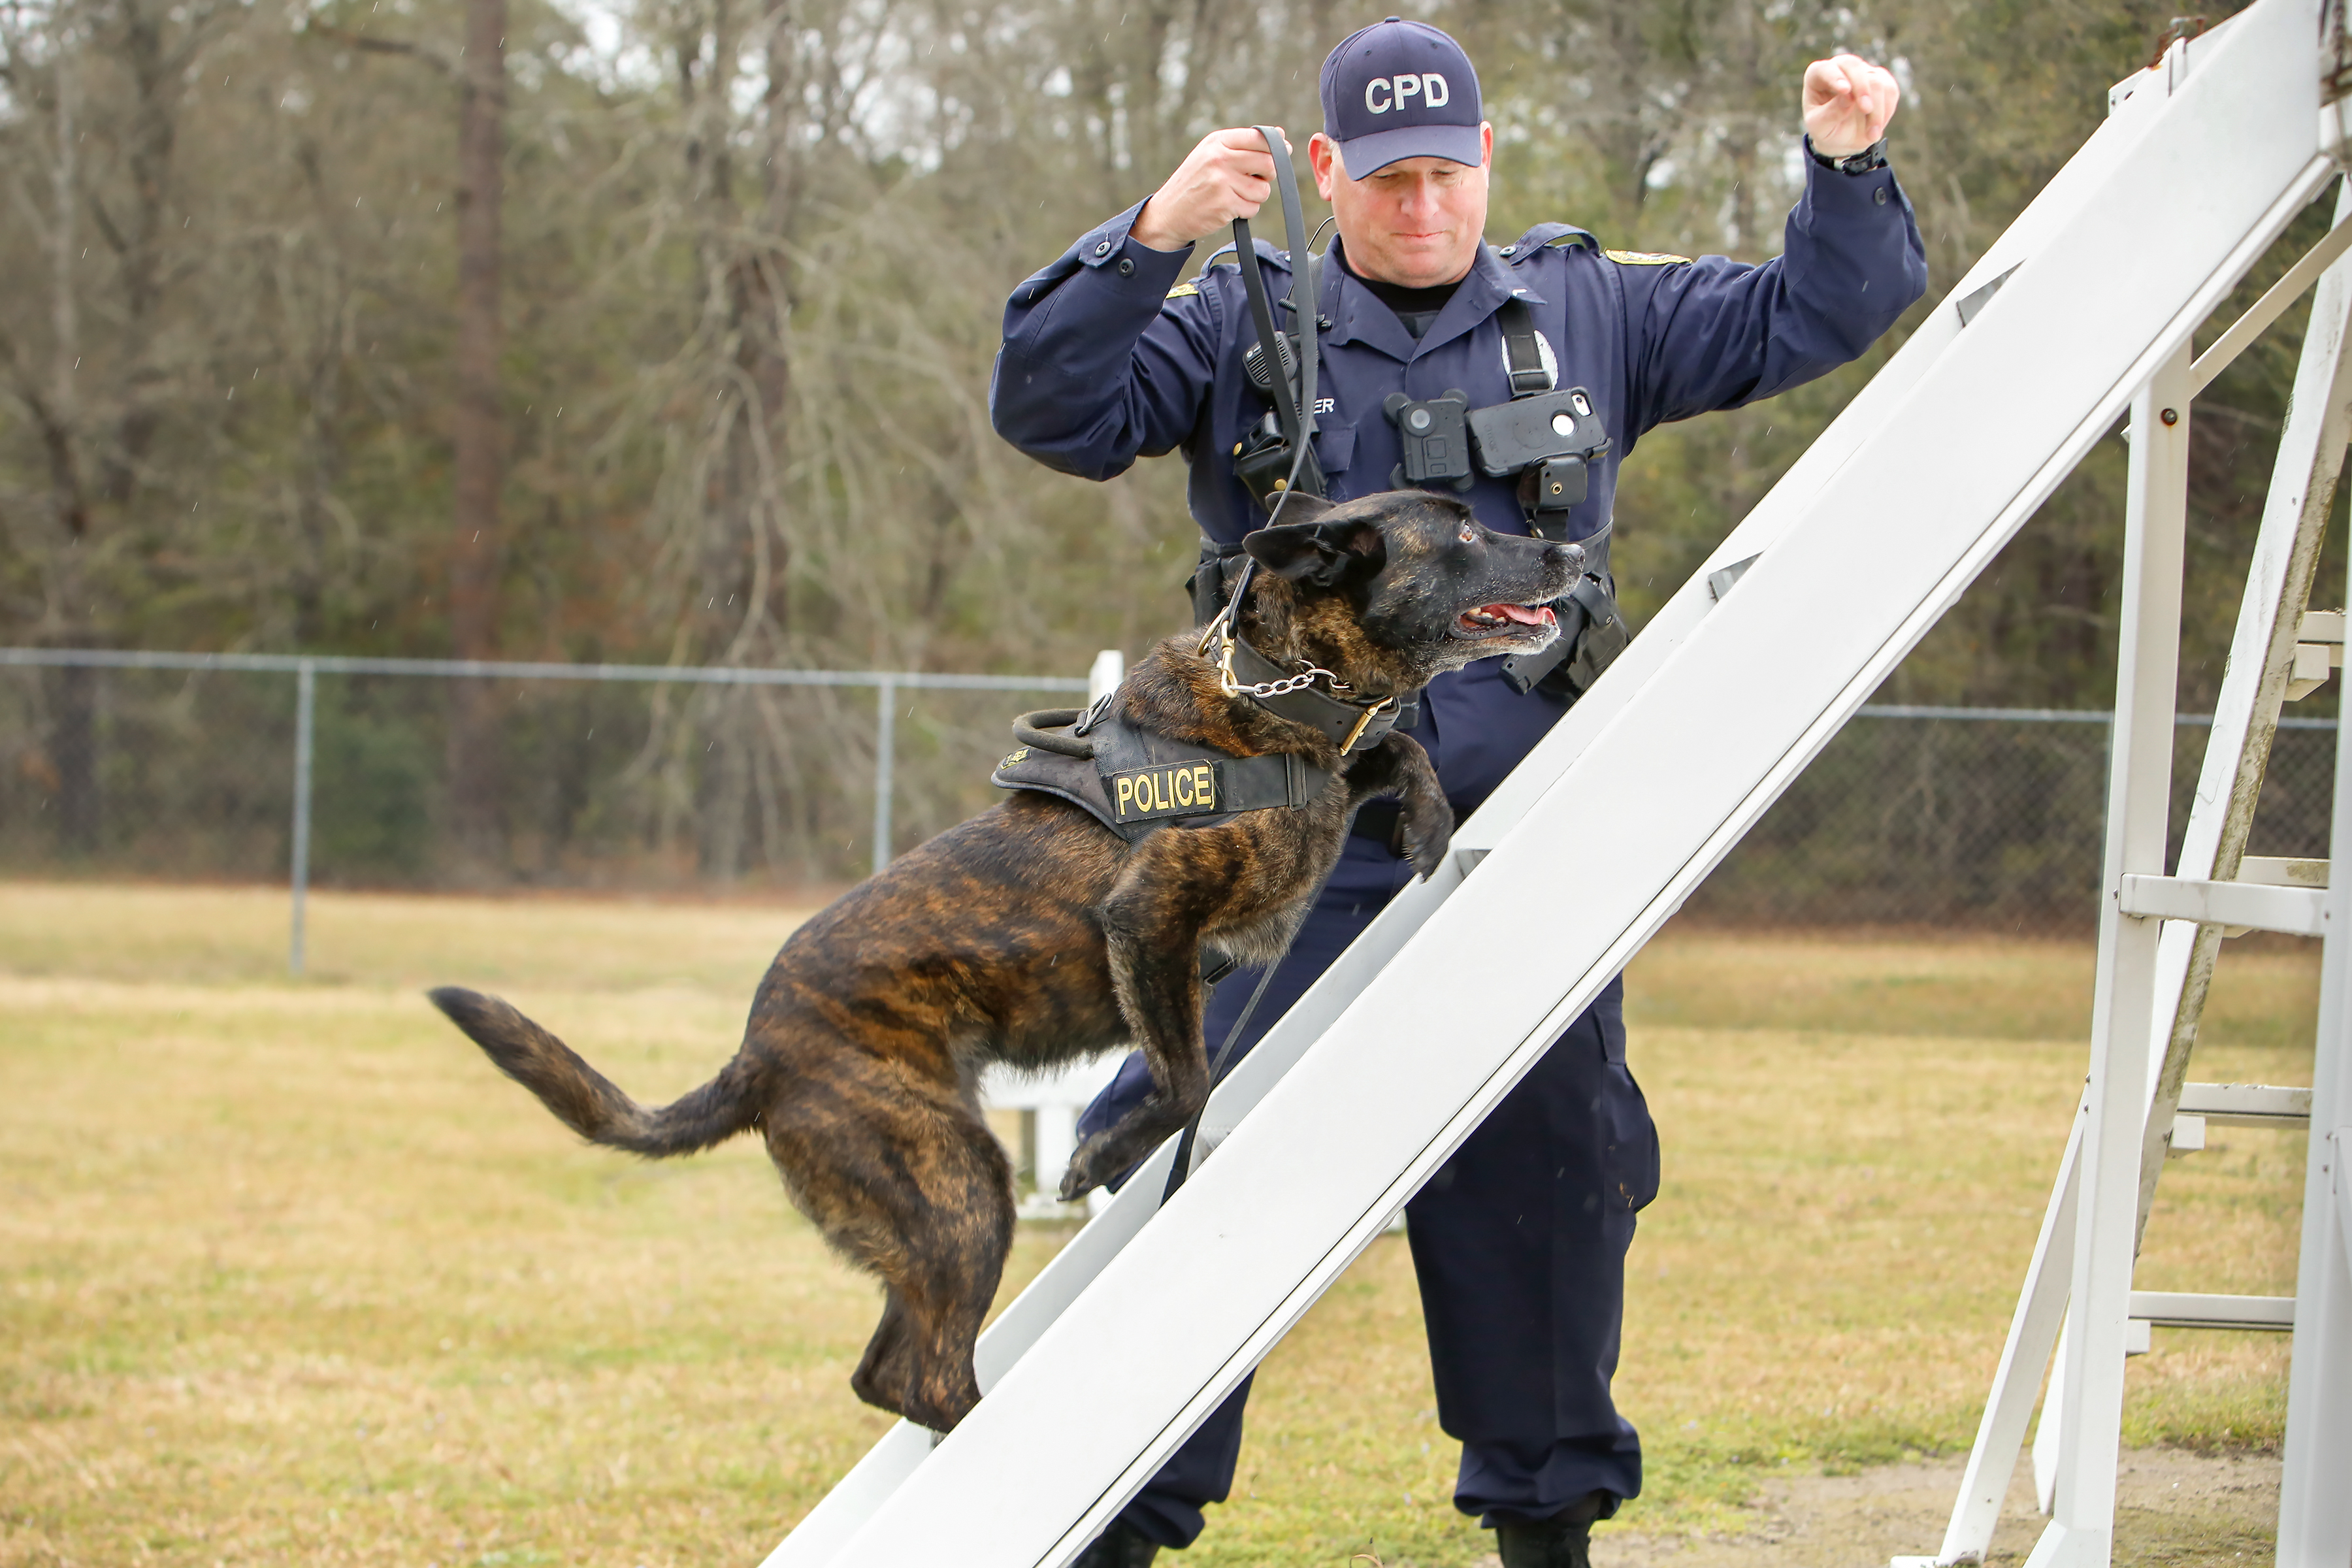 Master Public Safety Officer Eric Walker from the City of Columbia’s K-9 unit works with Dutch shepherd Indy to climb stairs at the agility park.